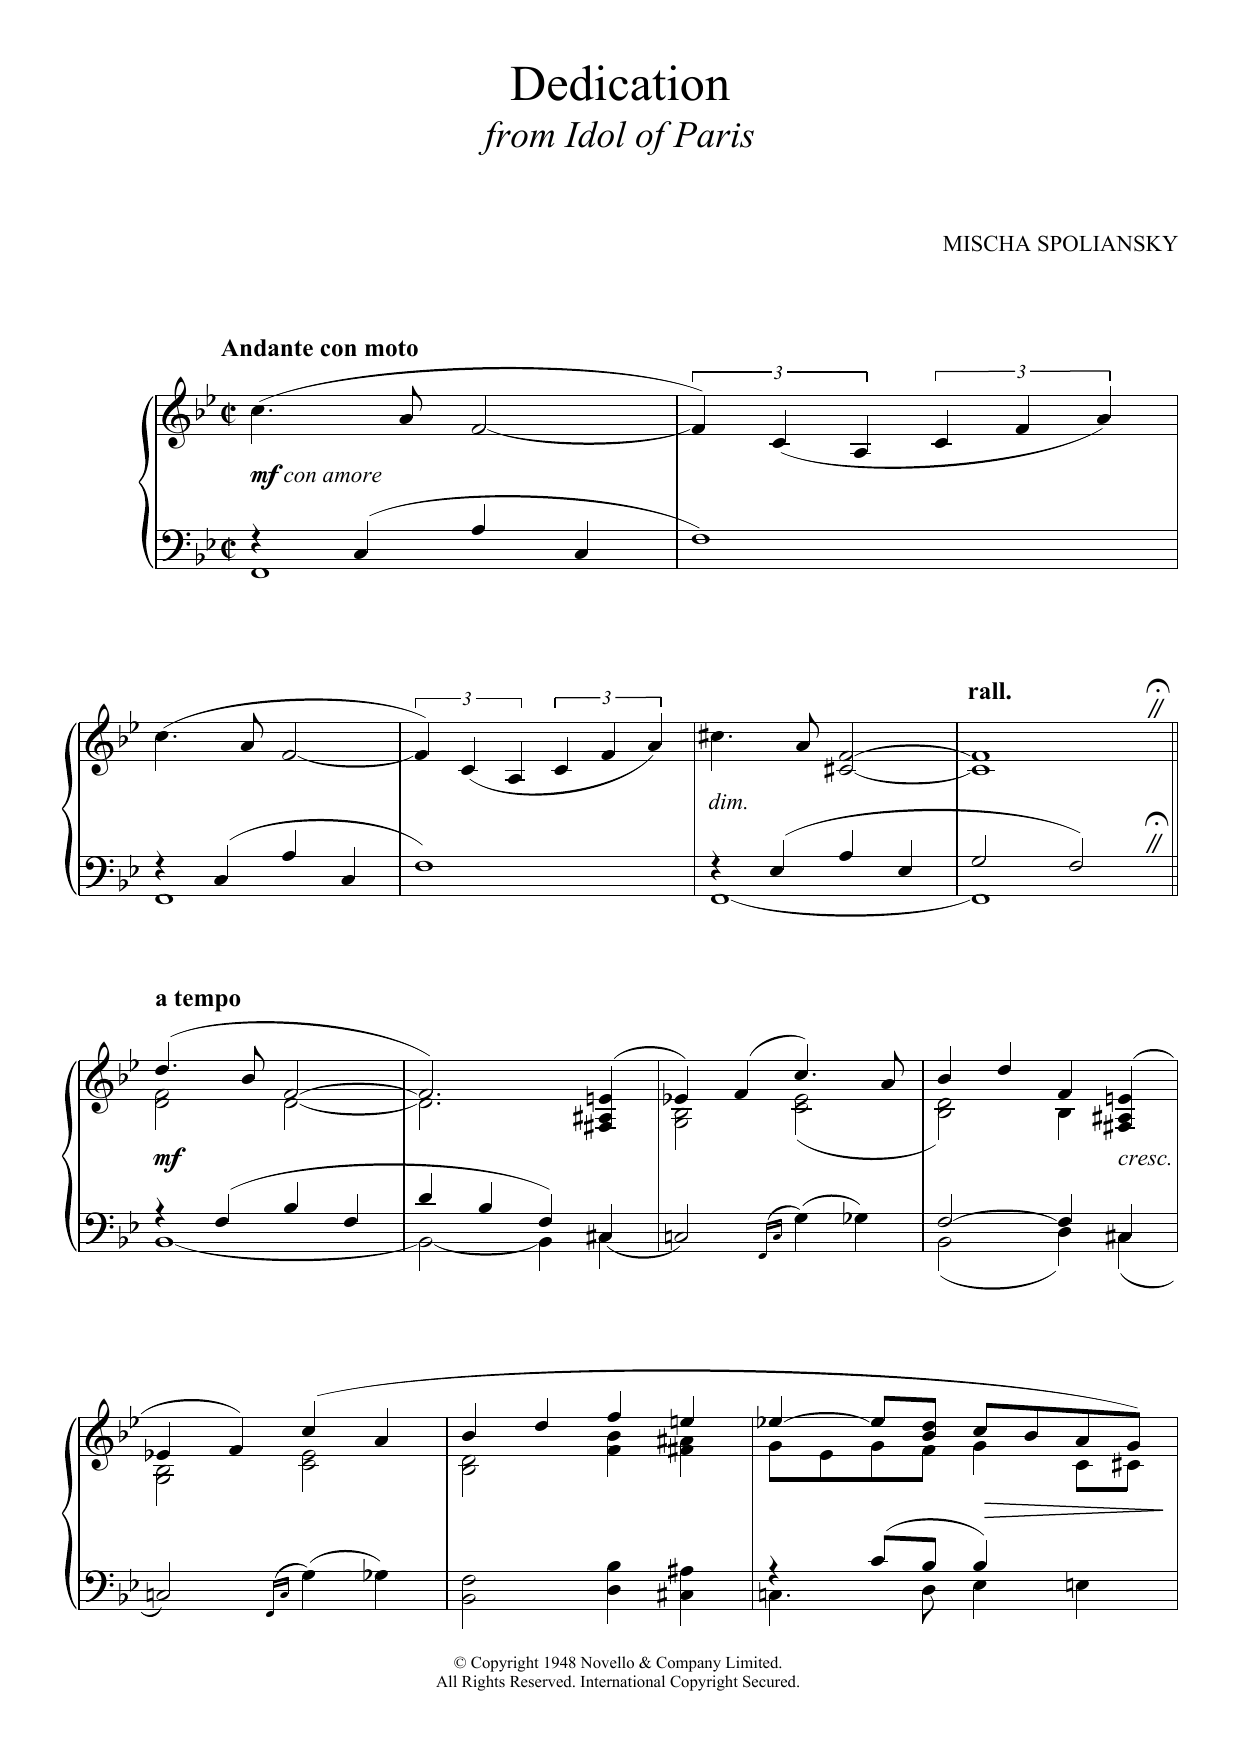 Mischa Spoliansky Dedication (from Idol Of Paris) sheet music notes and chords. Download Printable PDF.